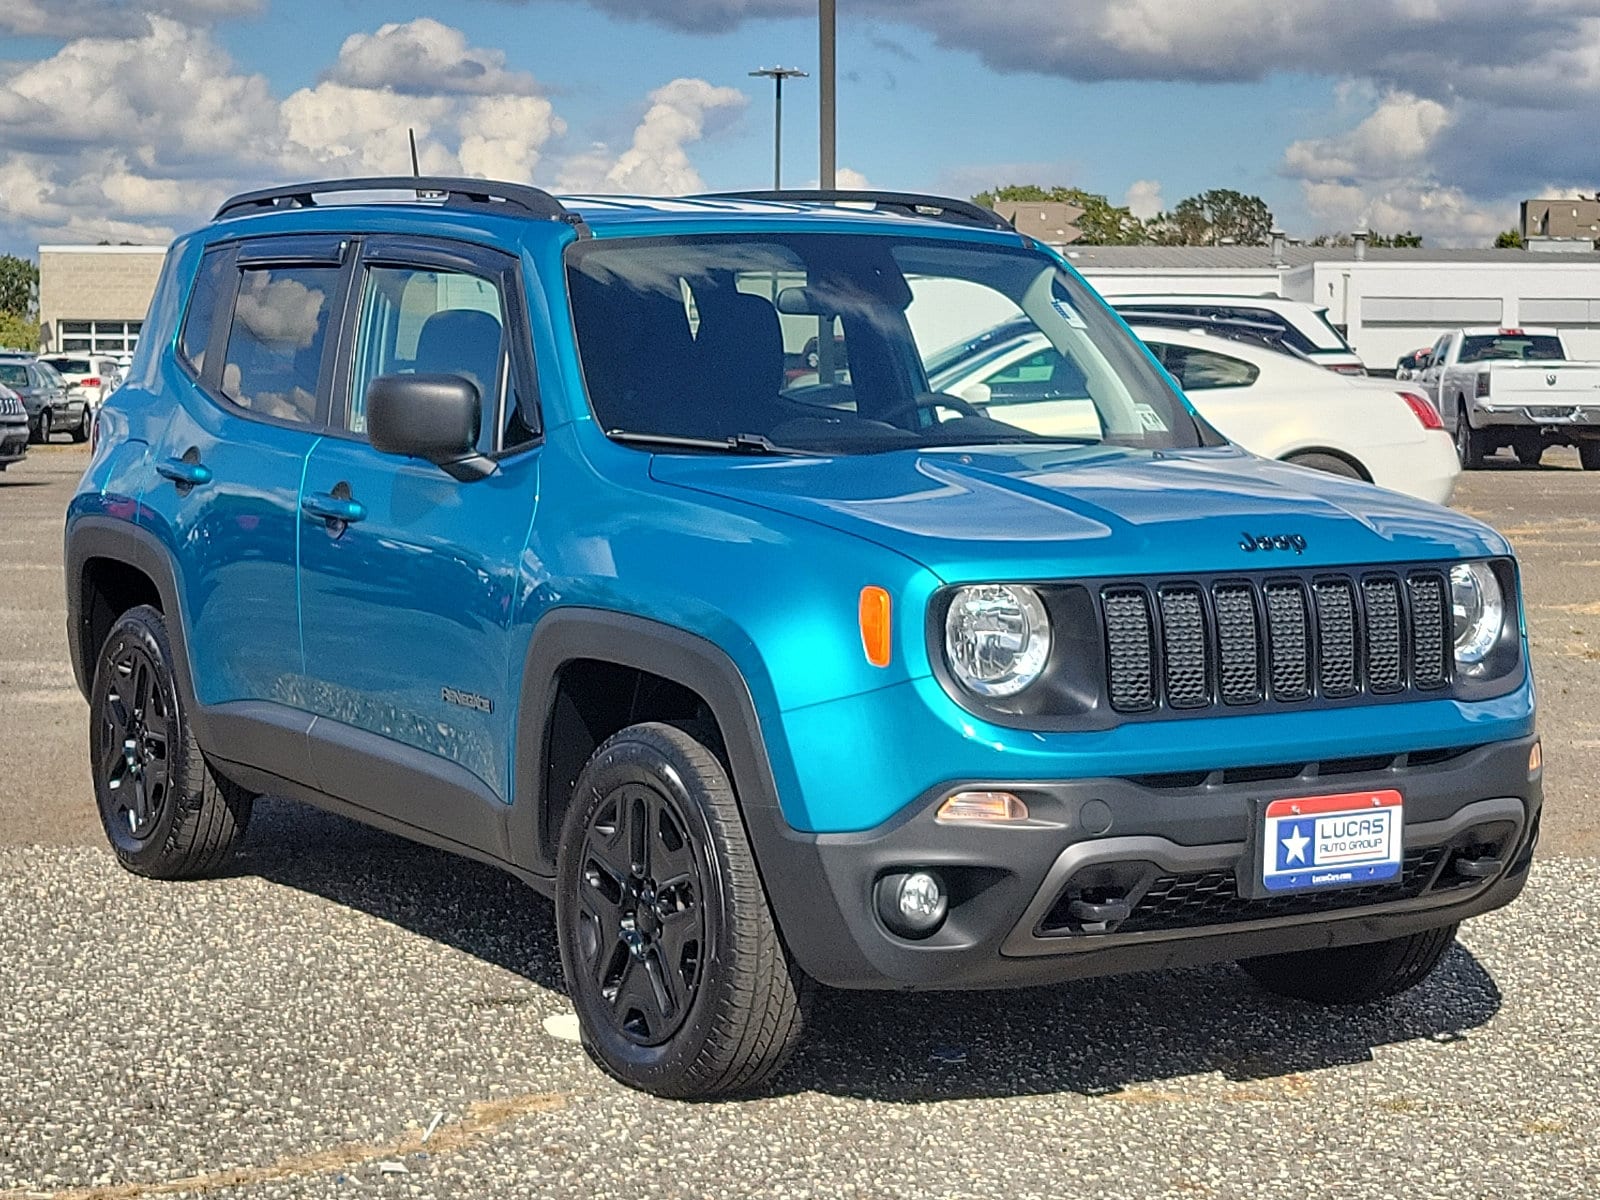 Certified 2019 Jeep Renegade Upland with VIN ZACNJBAB5KPK63402 for sale in Lumberton, NJ